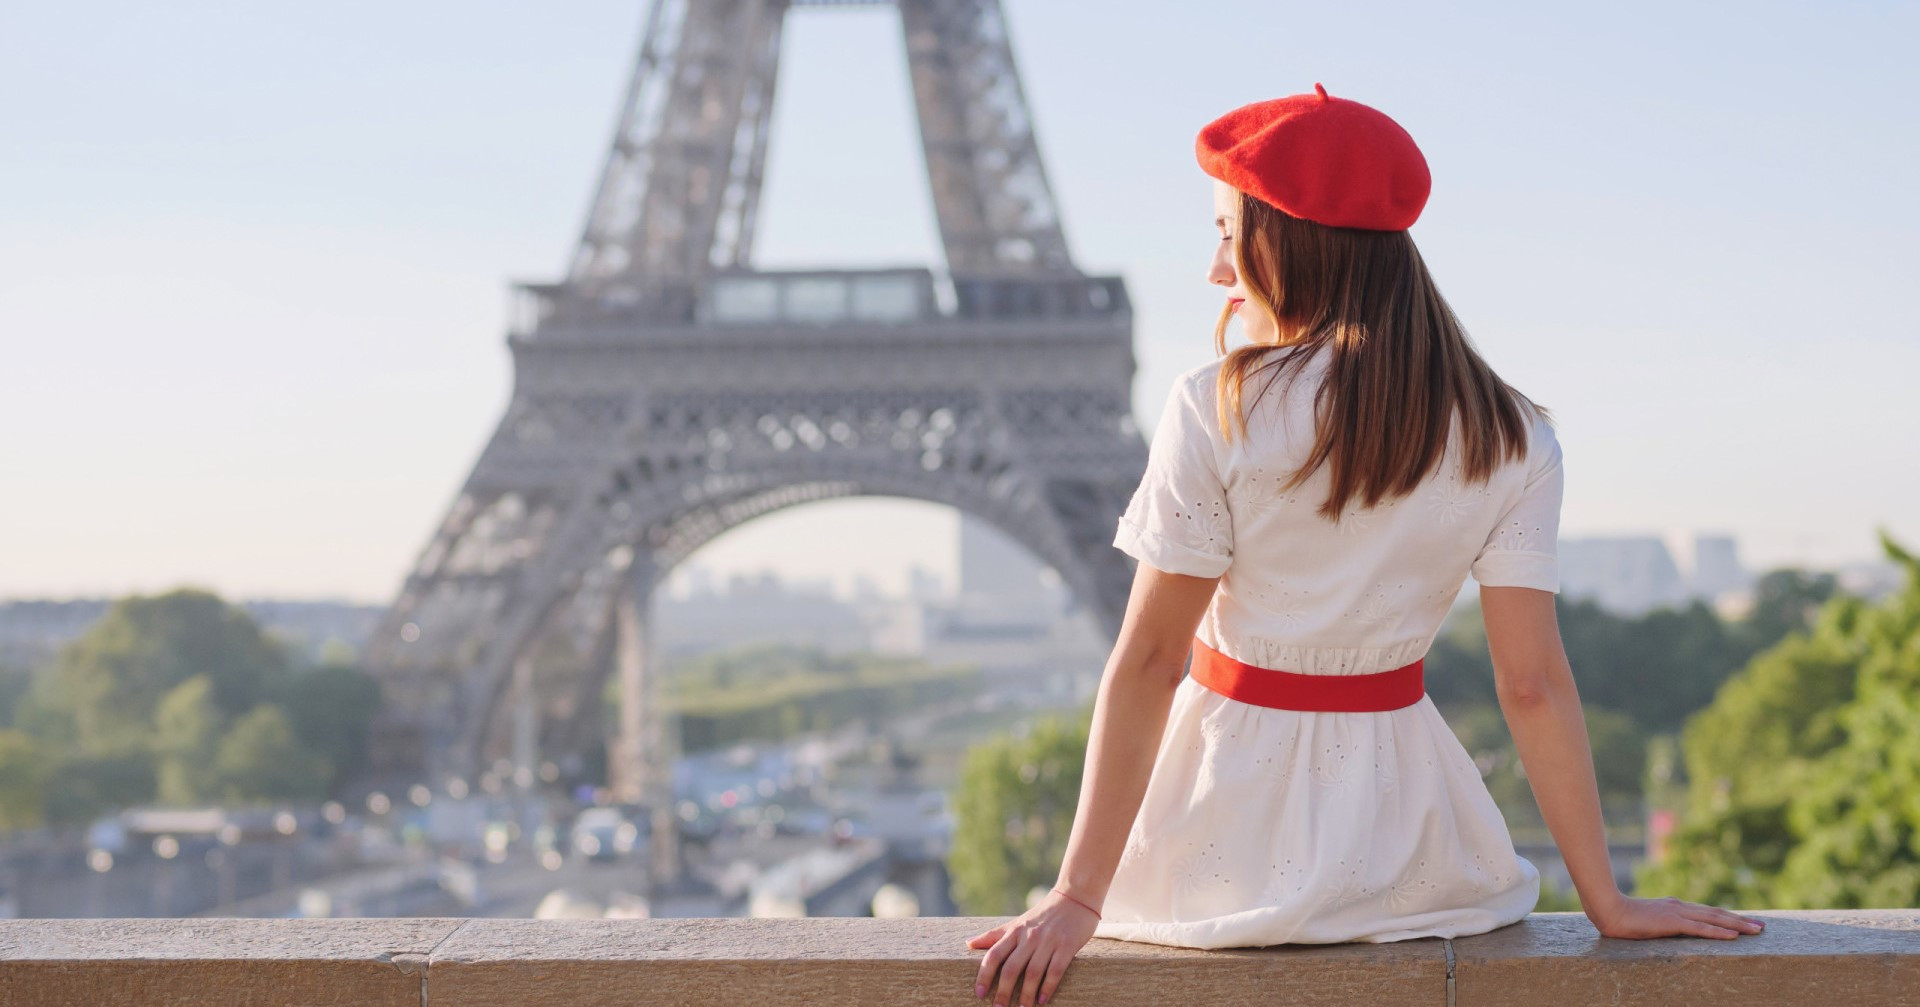 Paris syndrome: what it is, and how to avoid it